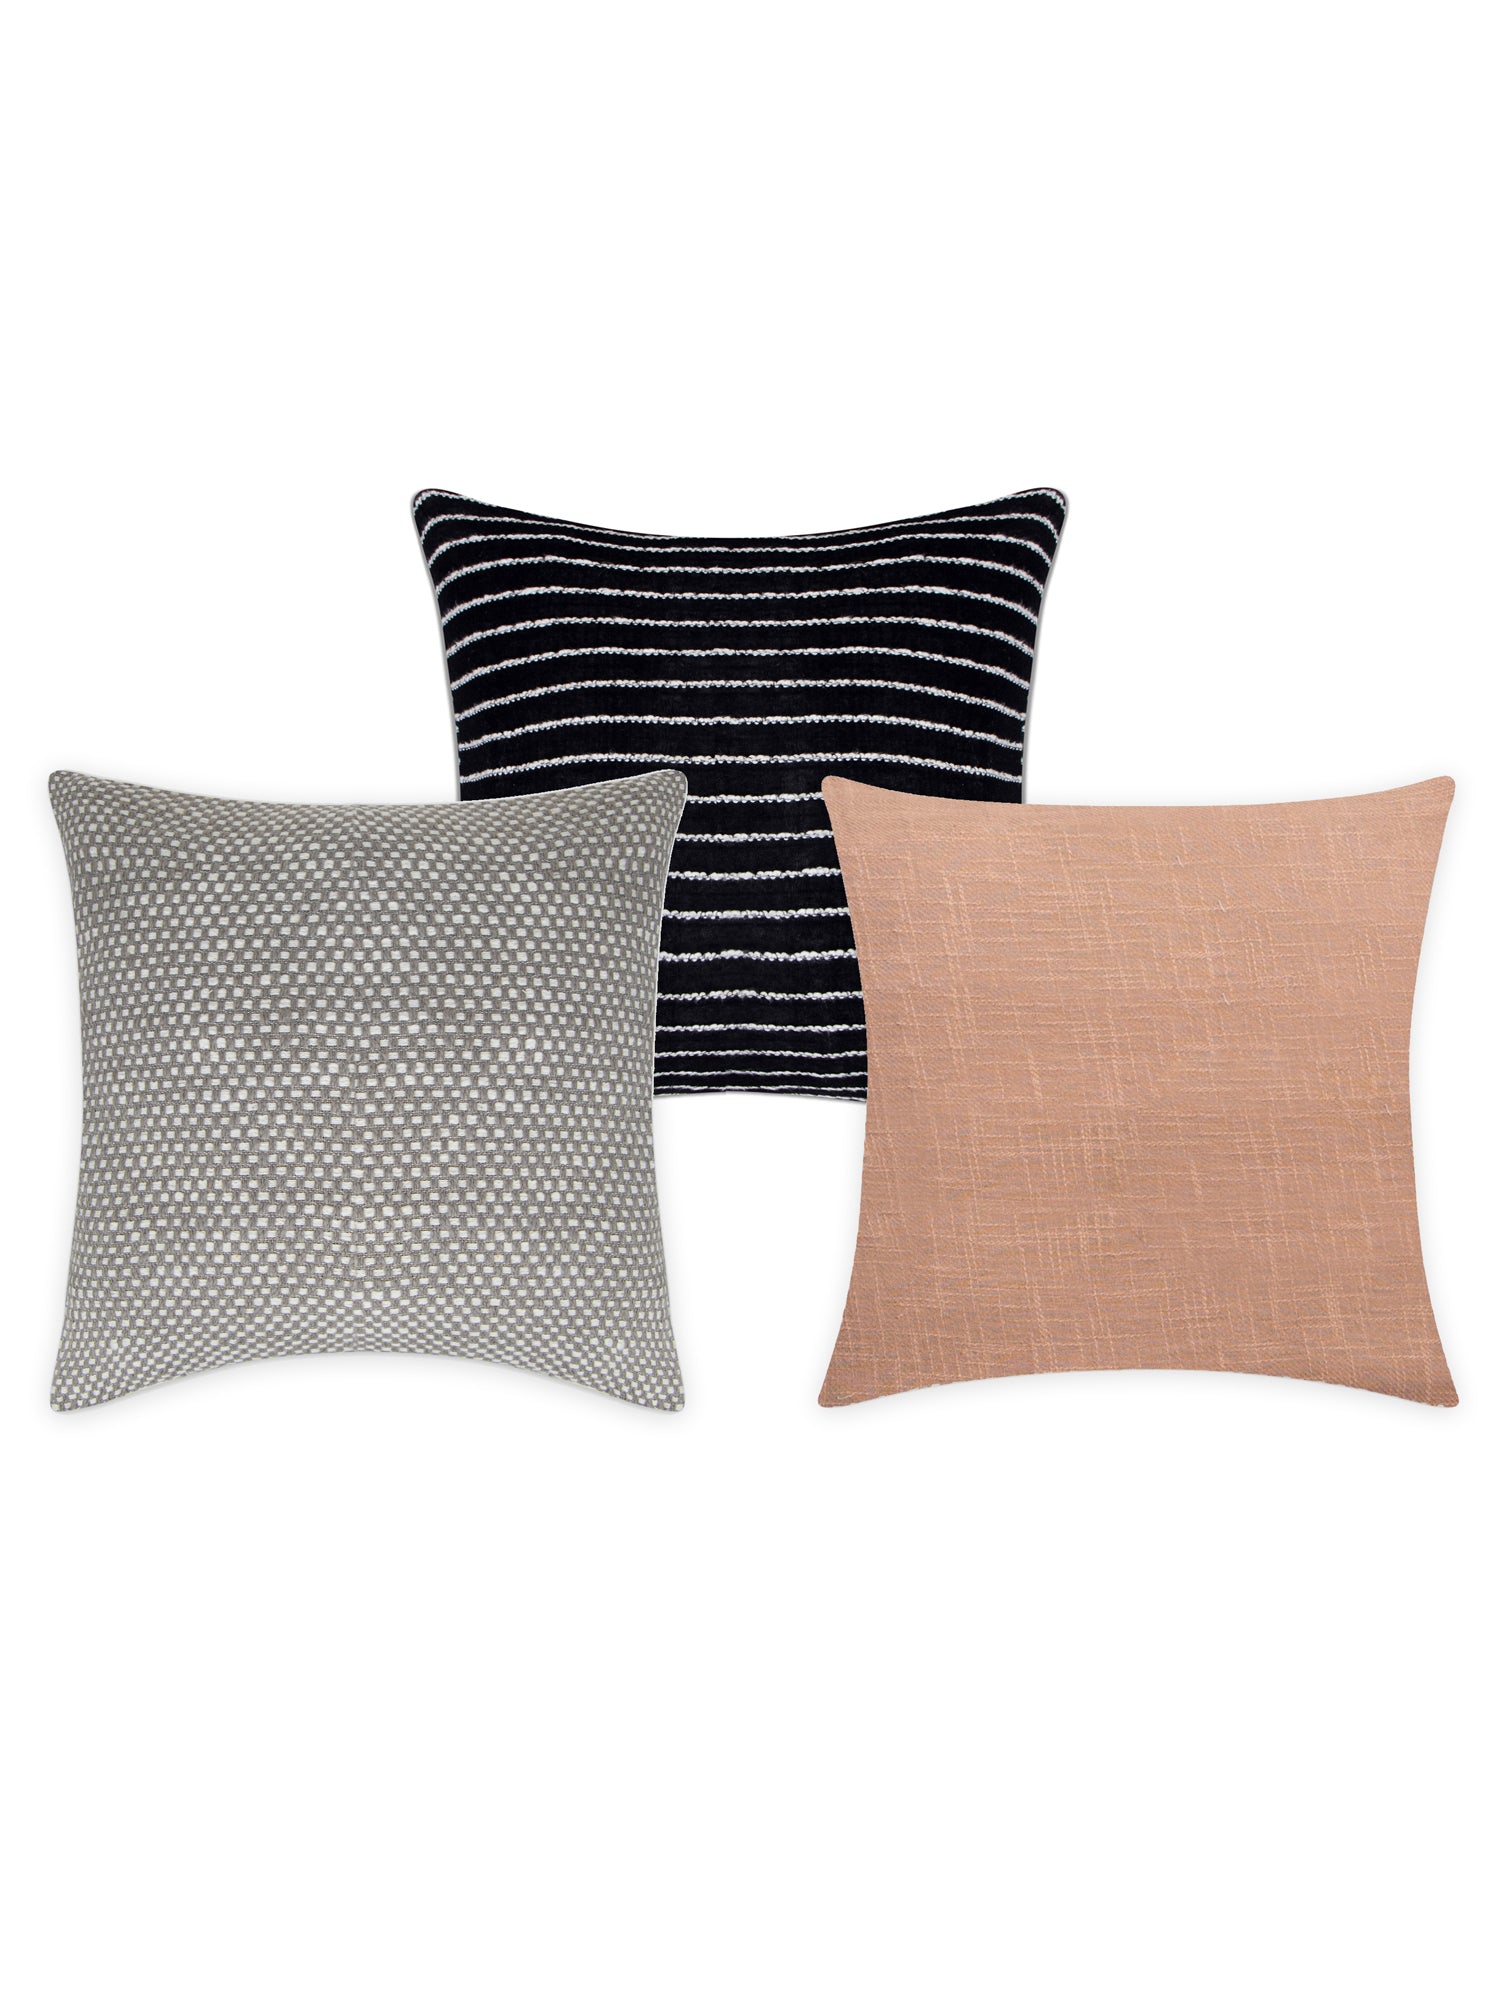 Cotton Cushion Covers Pack of 3